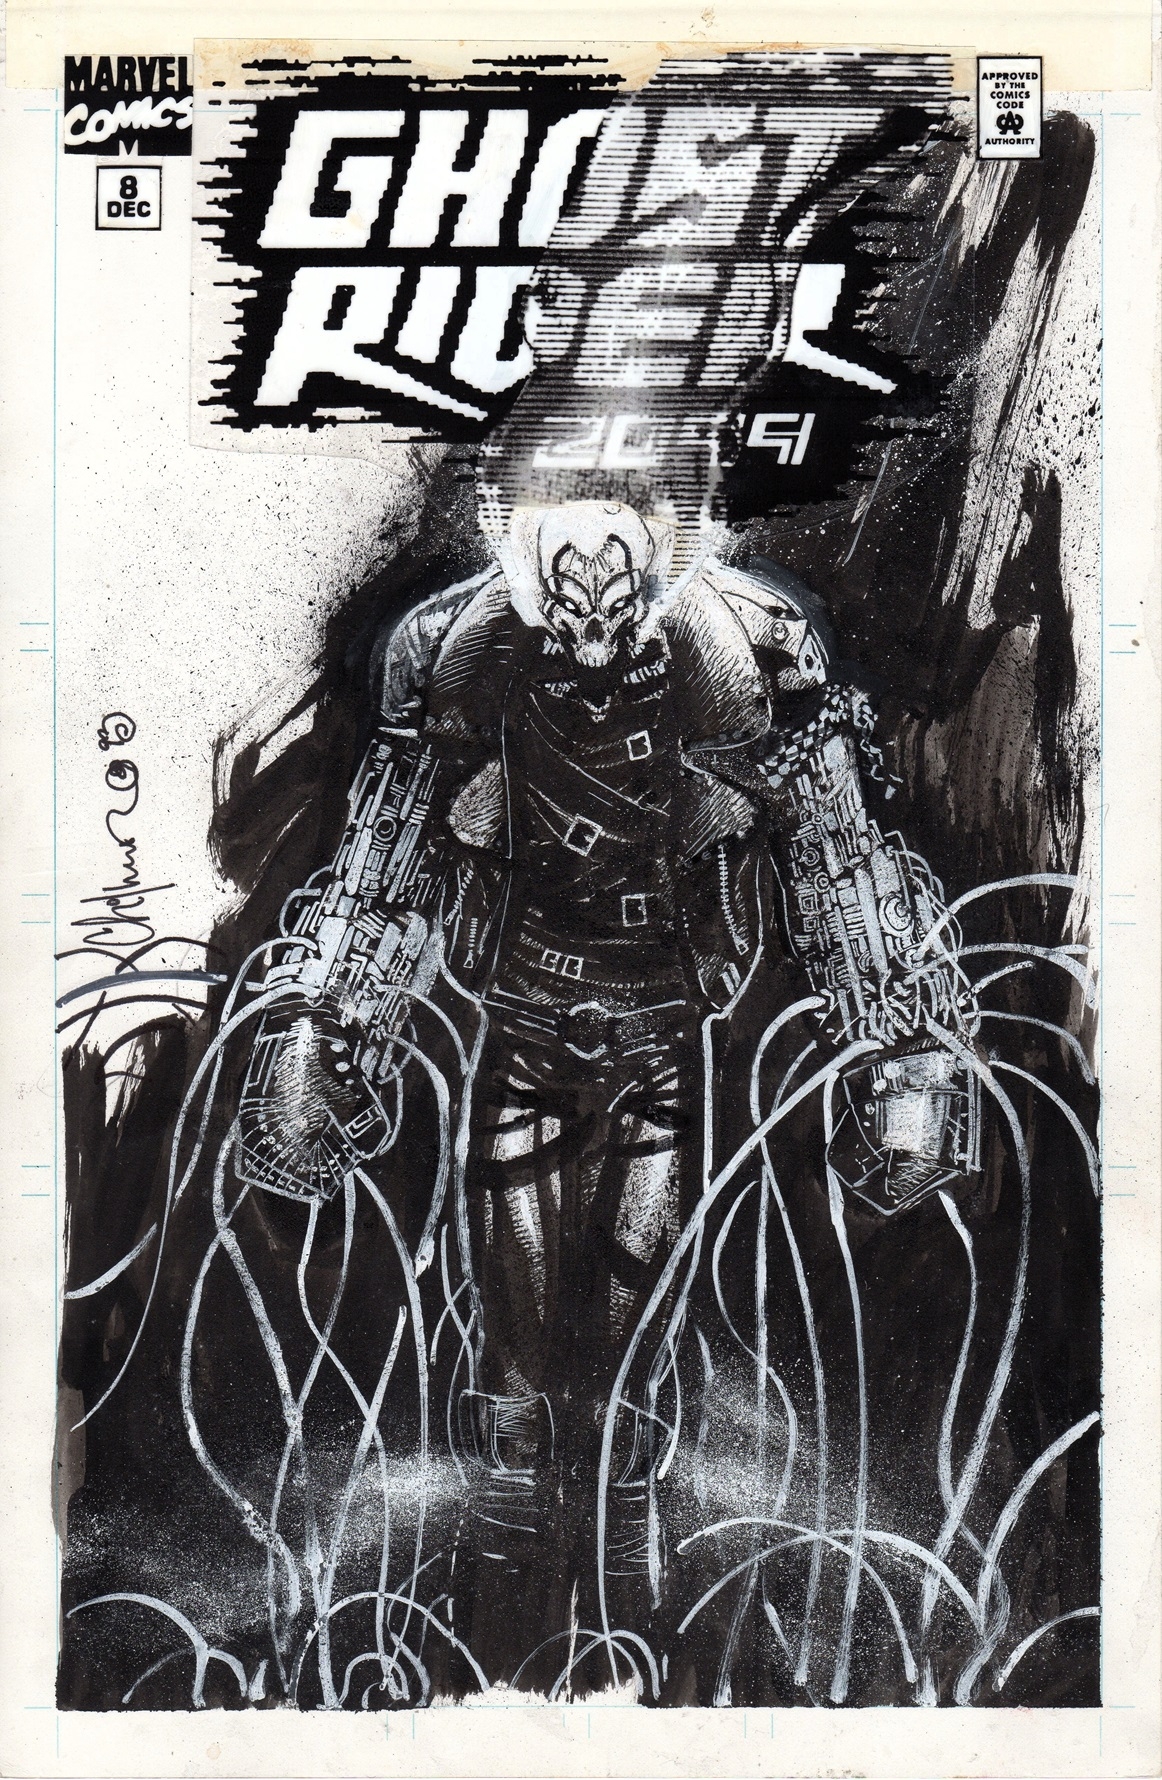 Ghost Rider #8 Poster